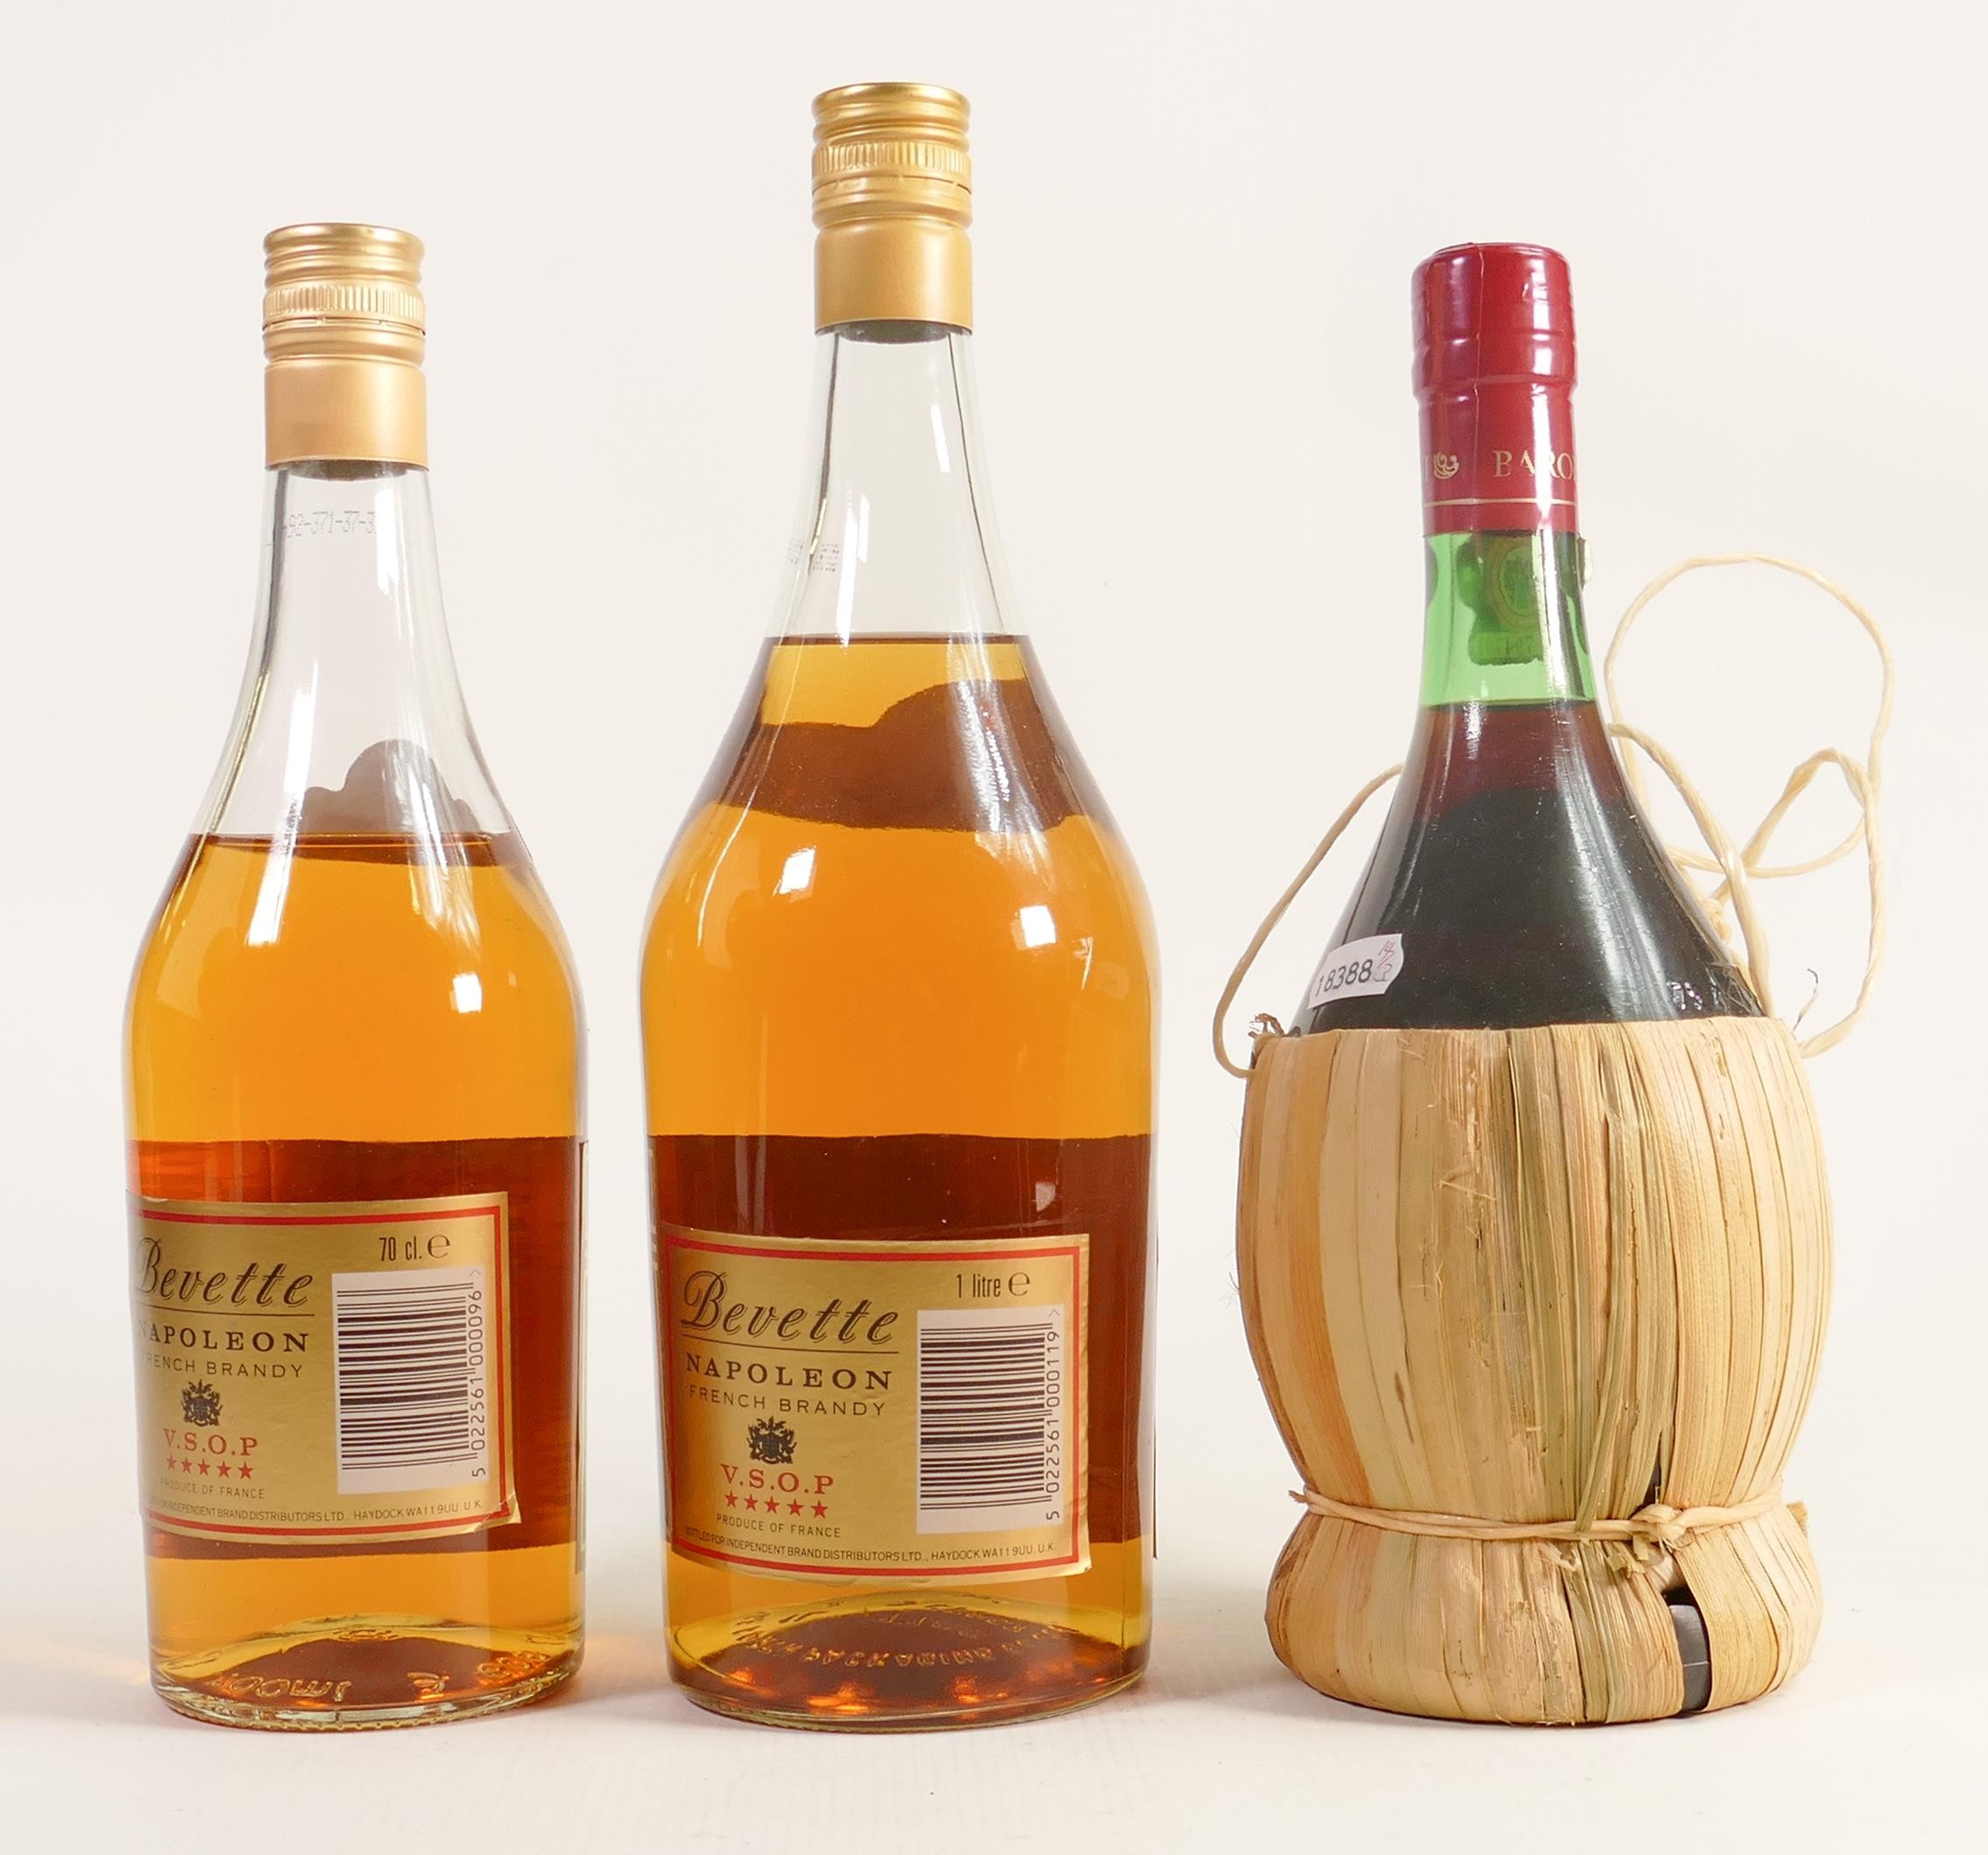 Bevette French Brandy 1 ltr & 70cl together with vintage Chianti Tuscany Wine. (3) - Image 2 of 2